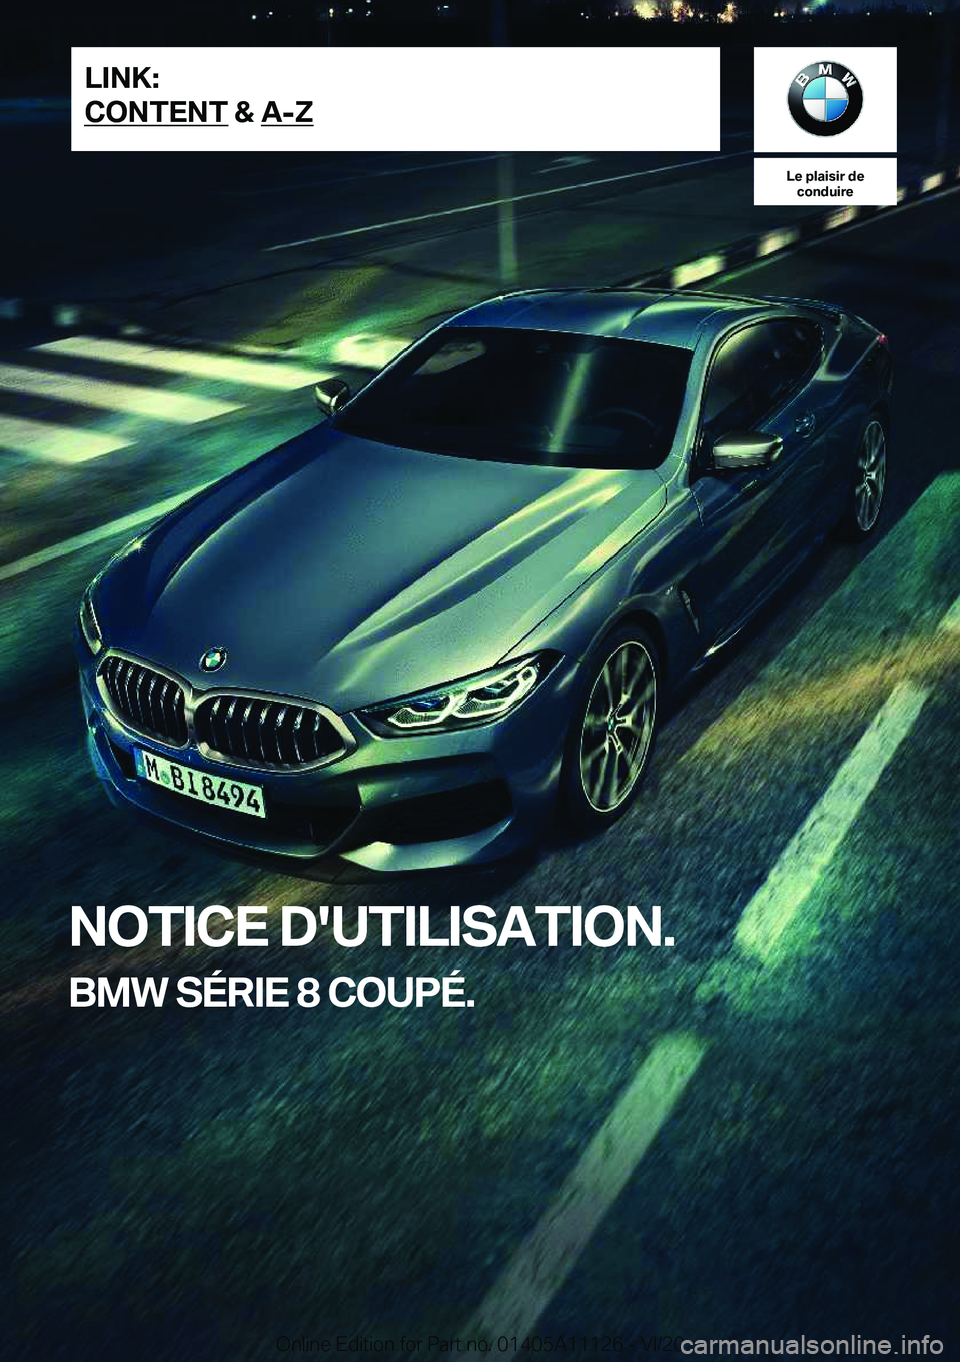 BMW 8 SERIES COUPE 2021  Notices Demploi (in French) �L�e��p�l�a�i�s�i�r��d�e�c�o�n�d�u�i�r�e
�N�O�T�I�C�E��D�'�U�T�I�L�I�S�A�T�I�O�N�.
�B�M�W��S�